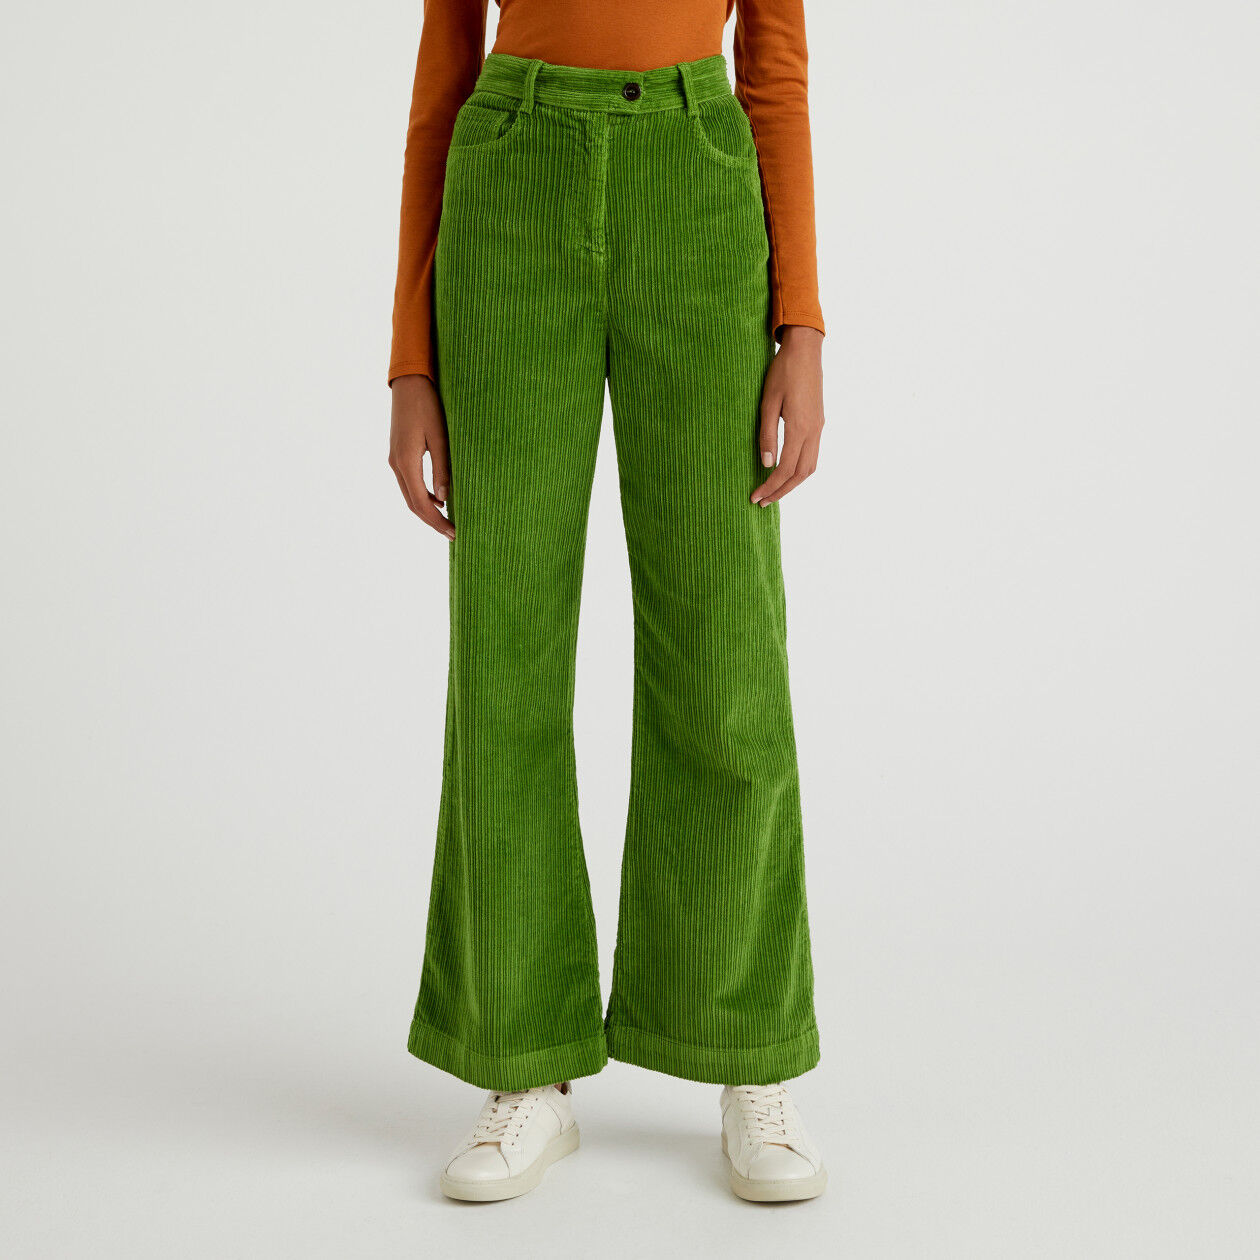 Buy Green Velvet Trousers Suit Separate at Strictly Influential